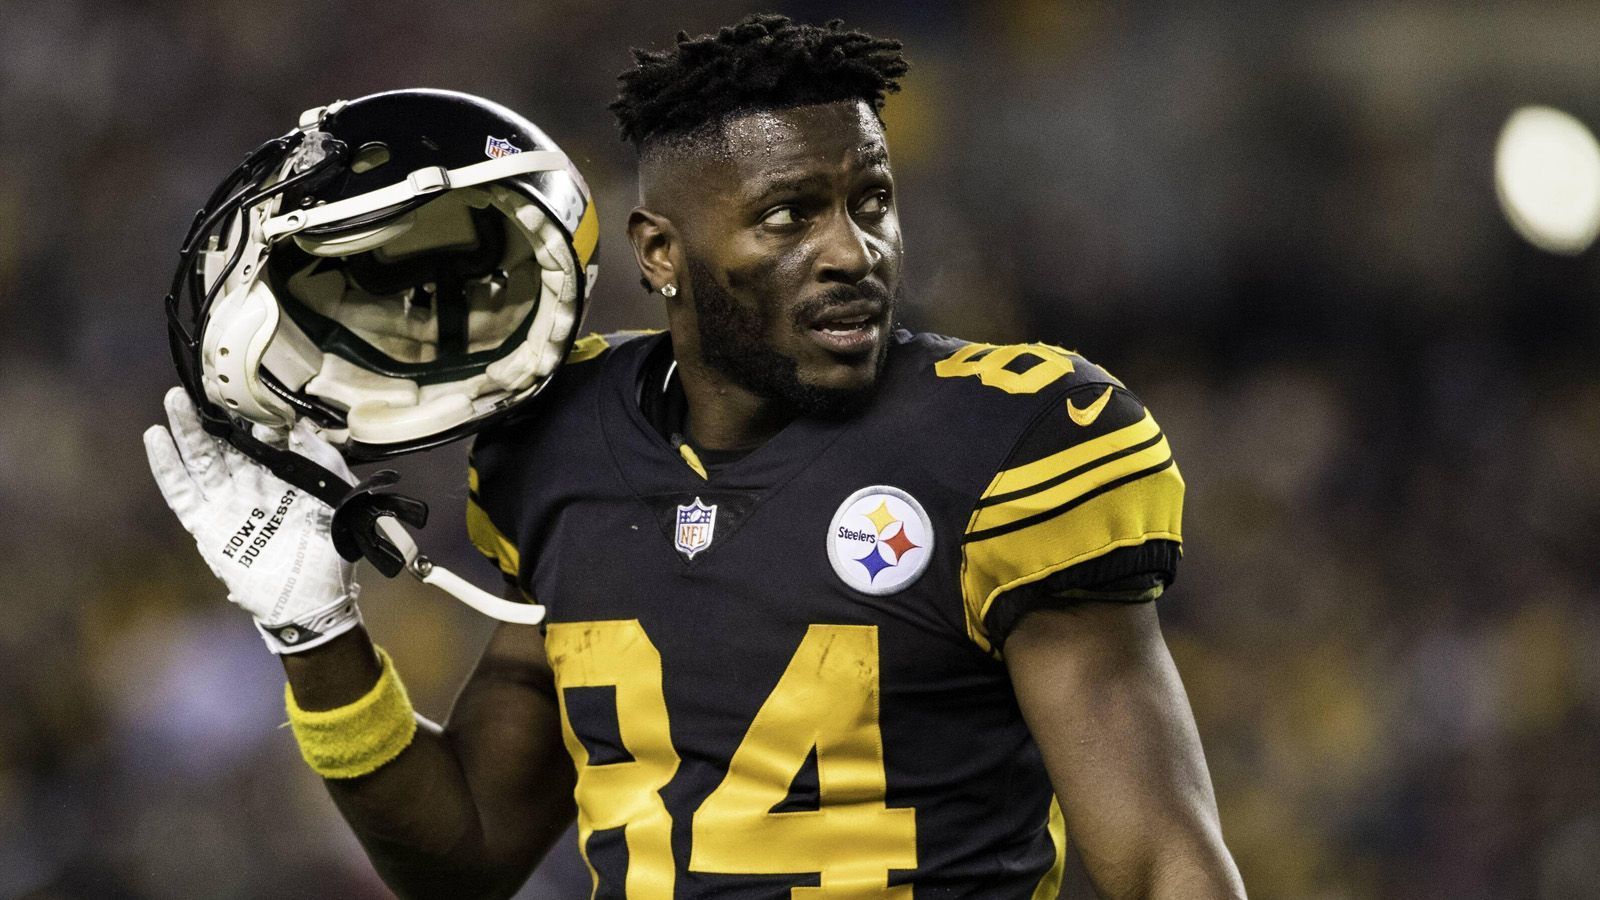 
                <strong>Antonio Brown (Pittsburgh Steelers)</strong><br>
                &#x2022; Spiele: 8<br>&#x2022; Saison: 2014 (21. Oktober - 14. Dezember)<br>
              